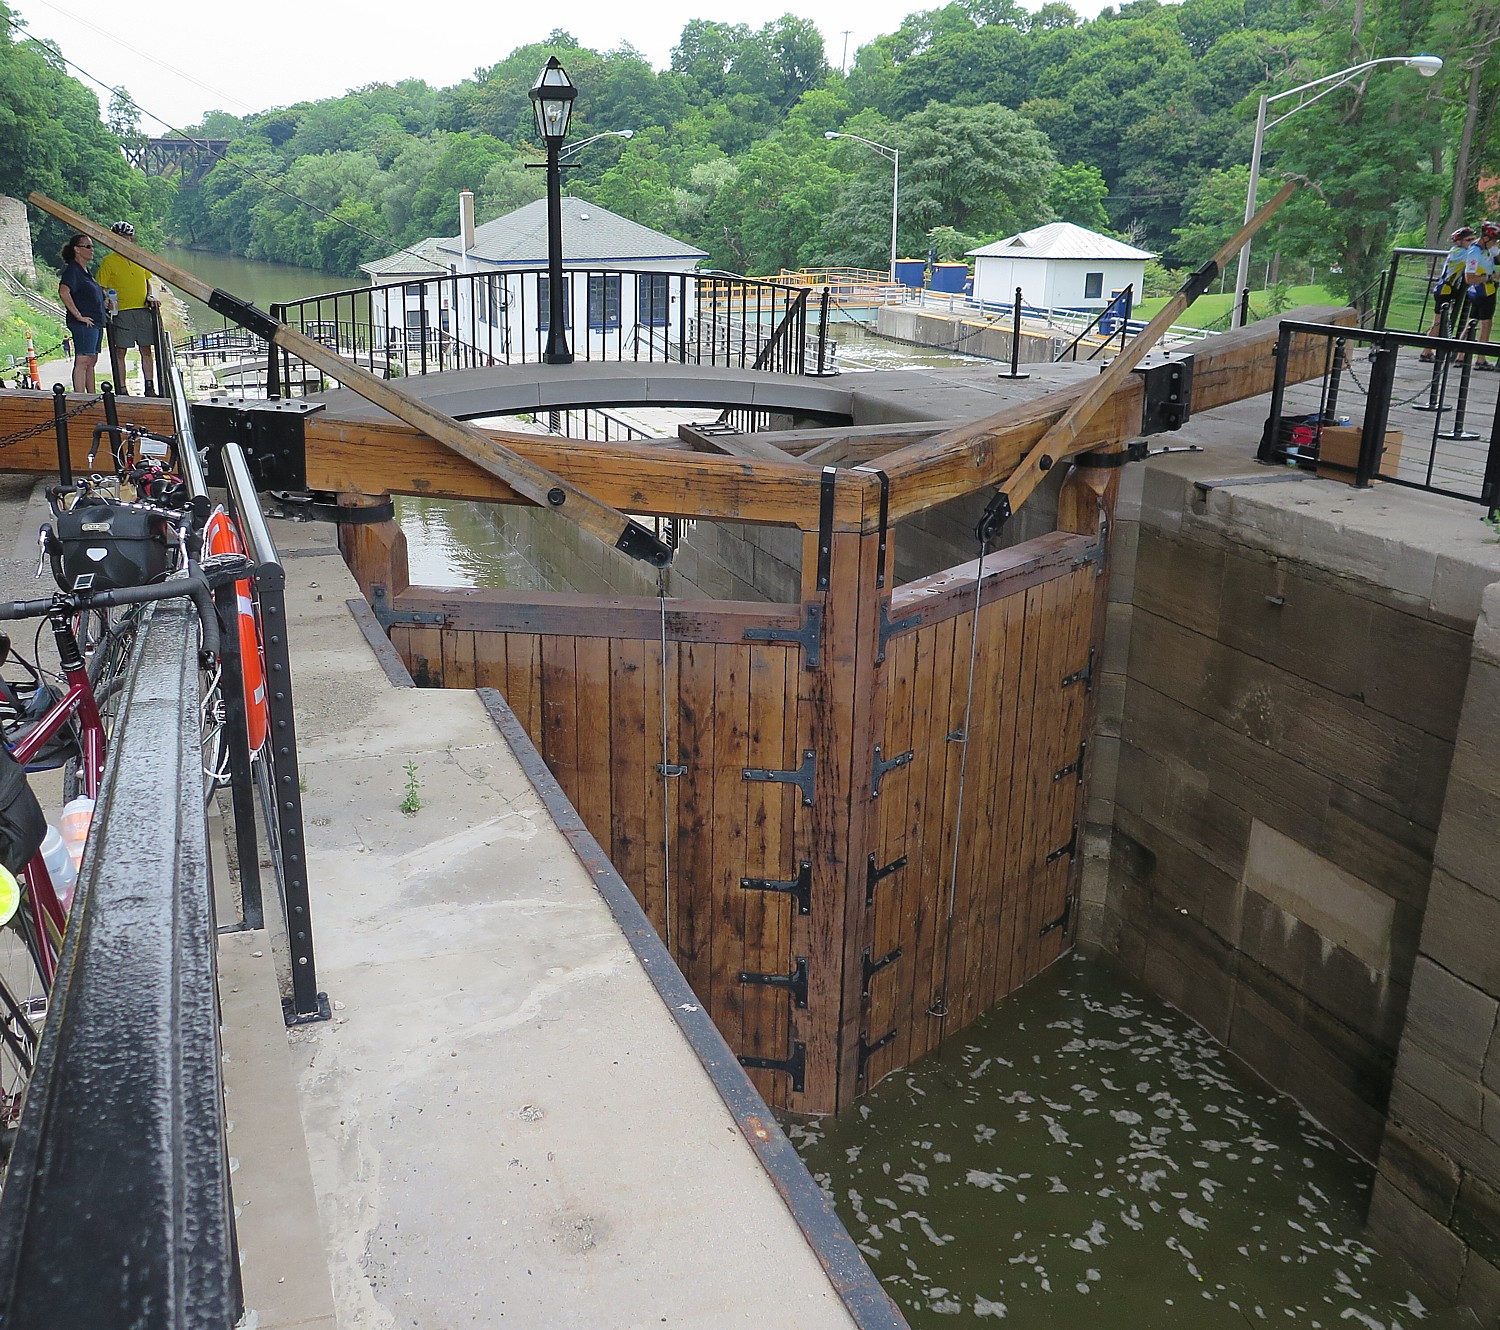  Last remaining original lock on the original Erie Canal, Lockport, NY, sits beside the enlarged New York State Barge Canal, which was just designated a national historic landmark © 2017 Karen Rubin/goingplacesfarandnear.com 